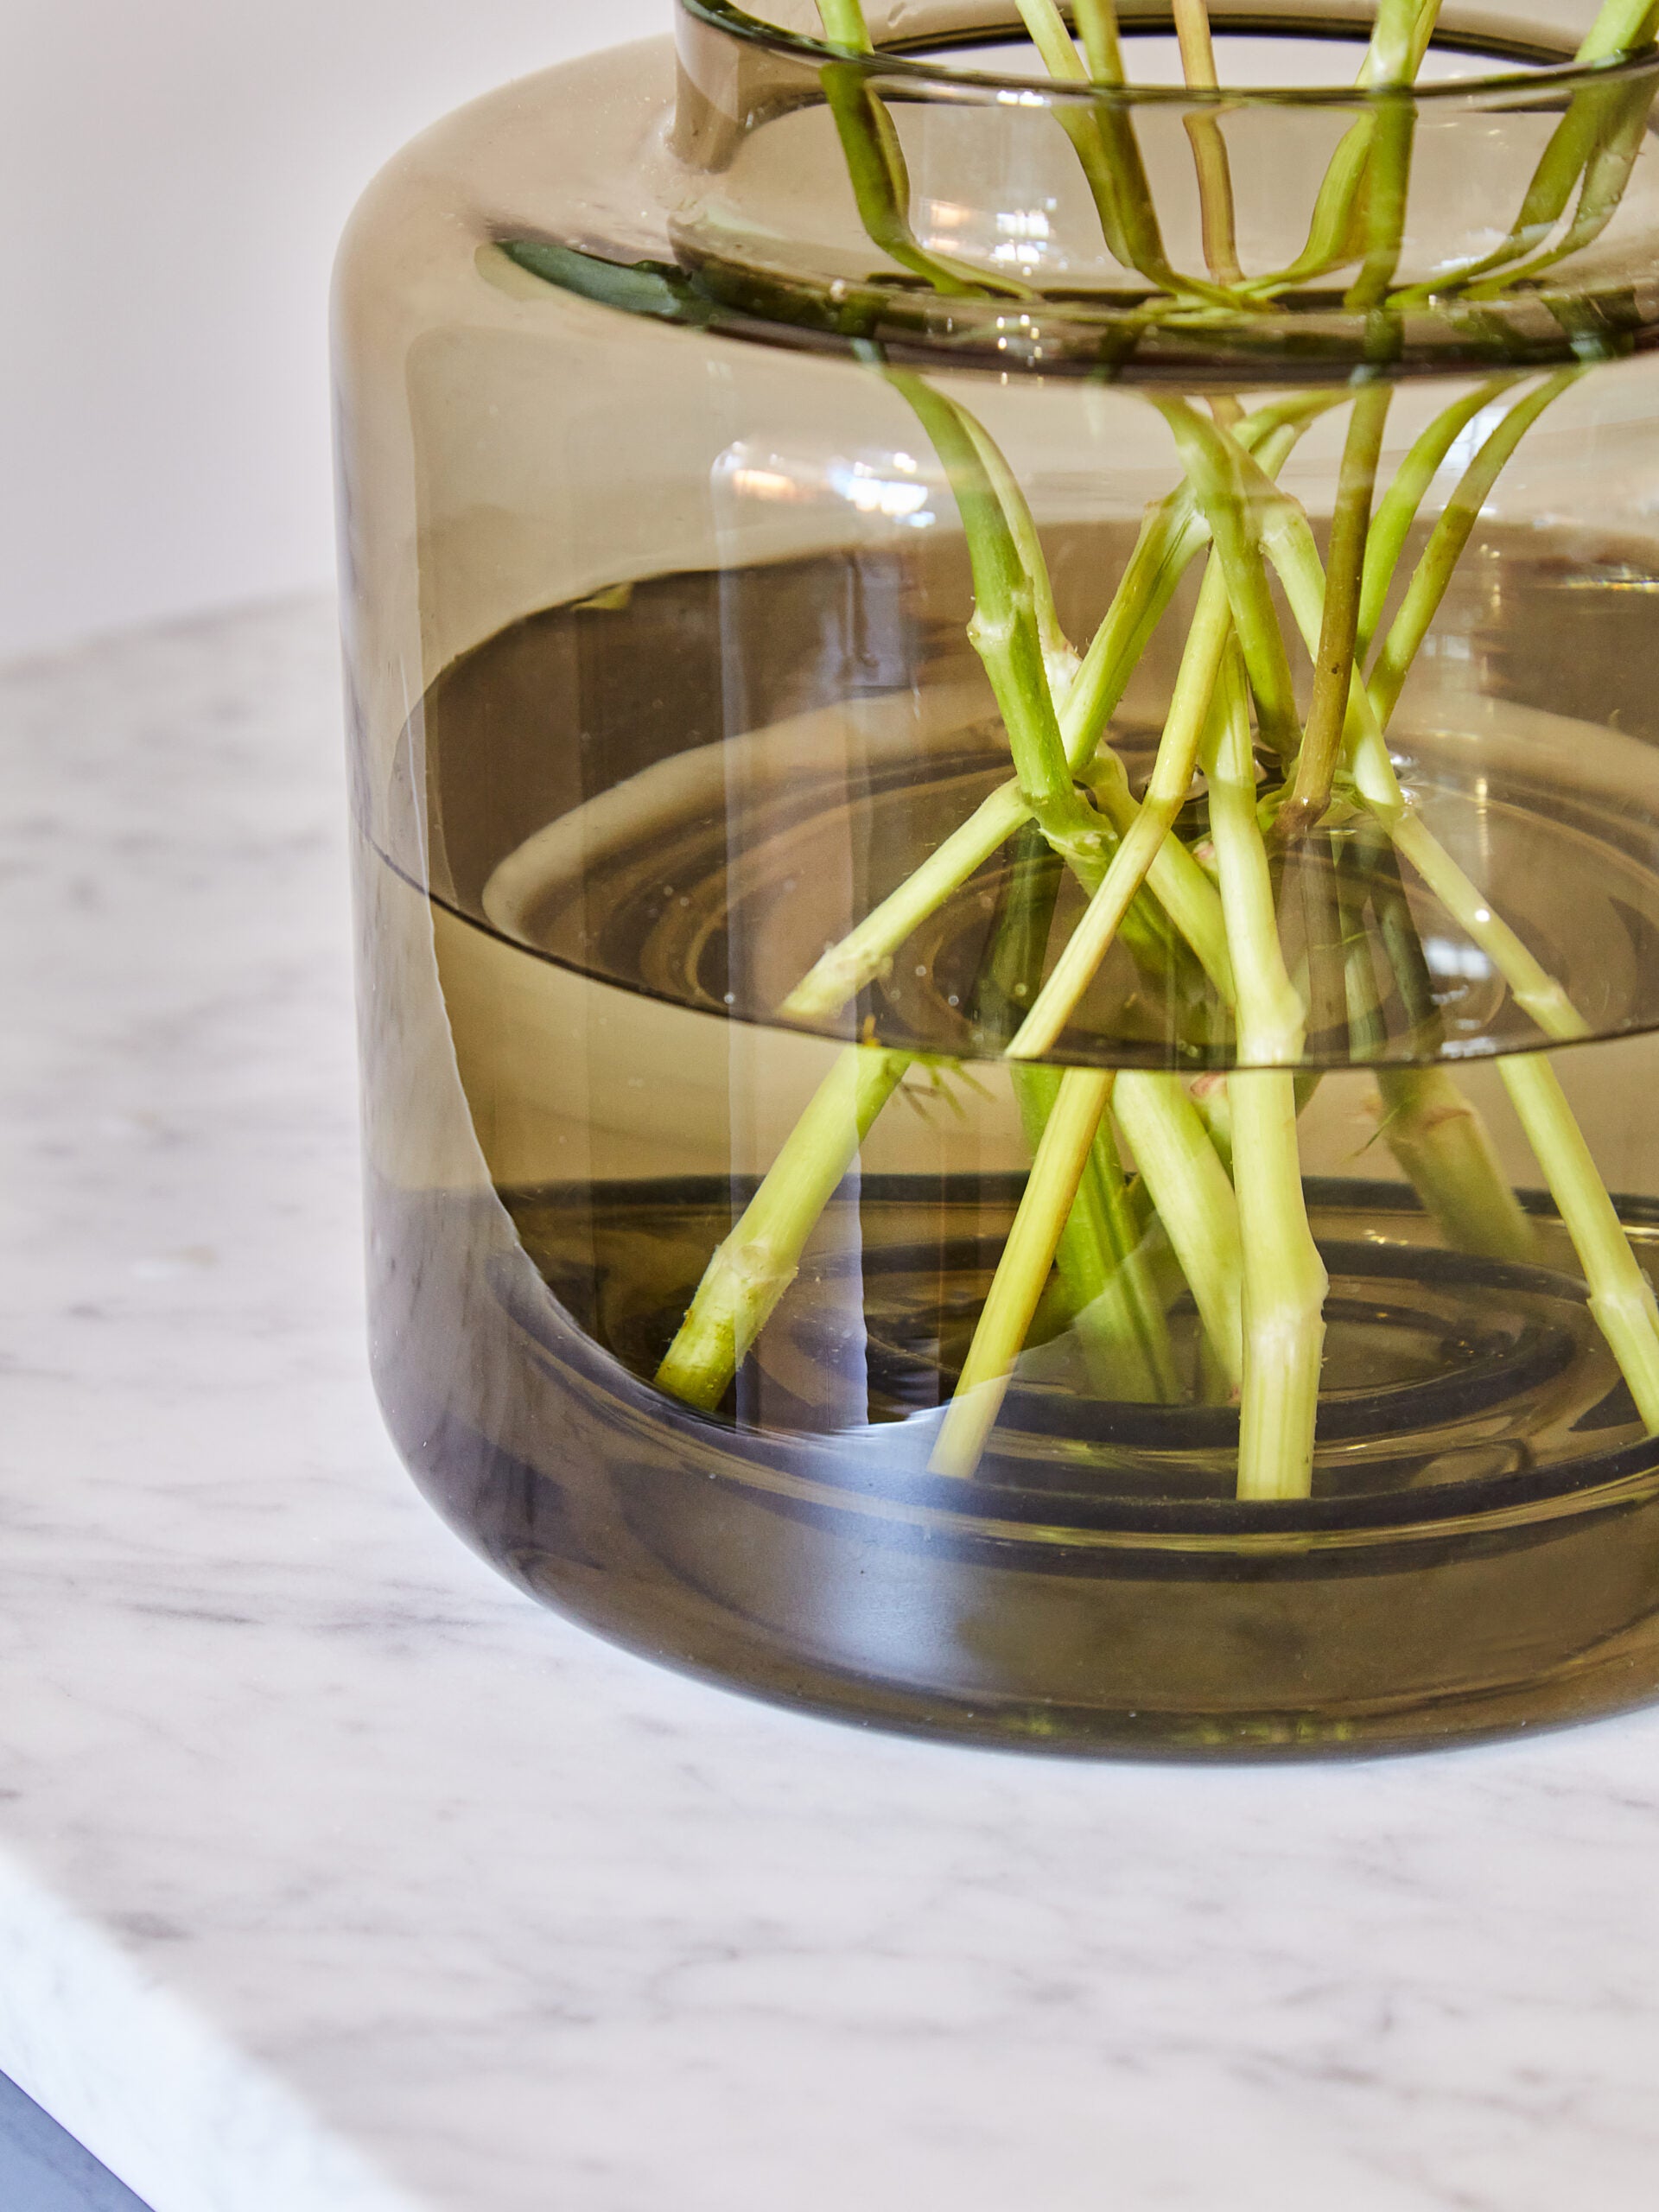 IKEA’s New Vase Has a Hidden Feature That Makes Every Arrangement Look Professional